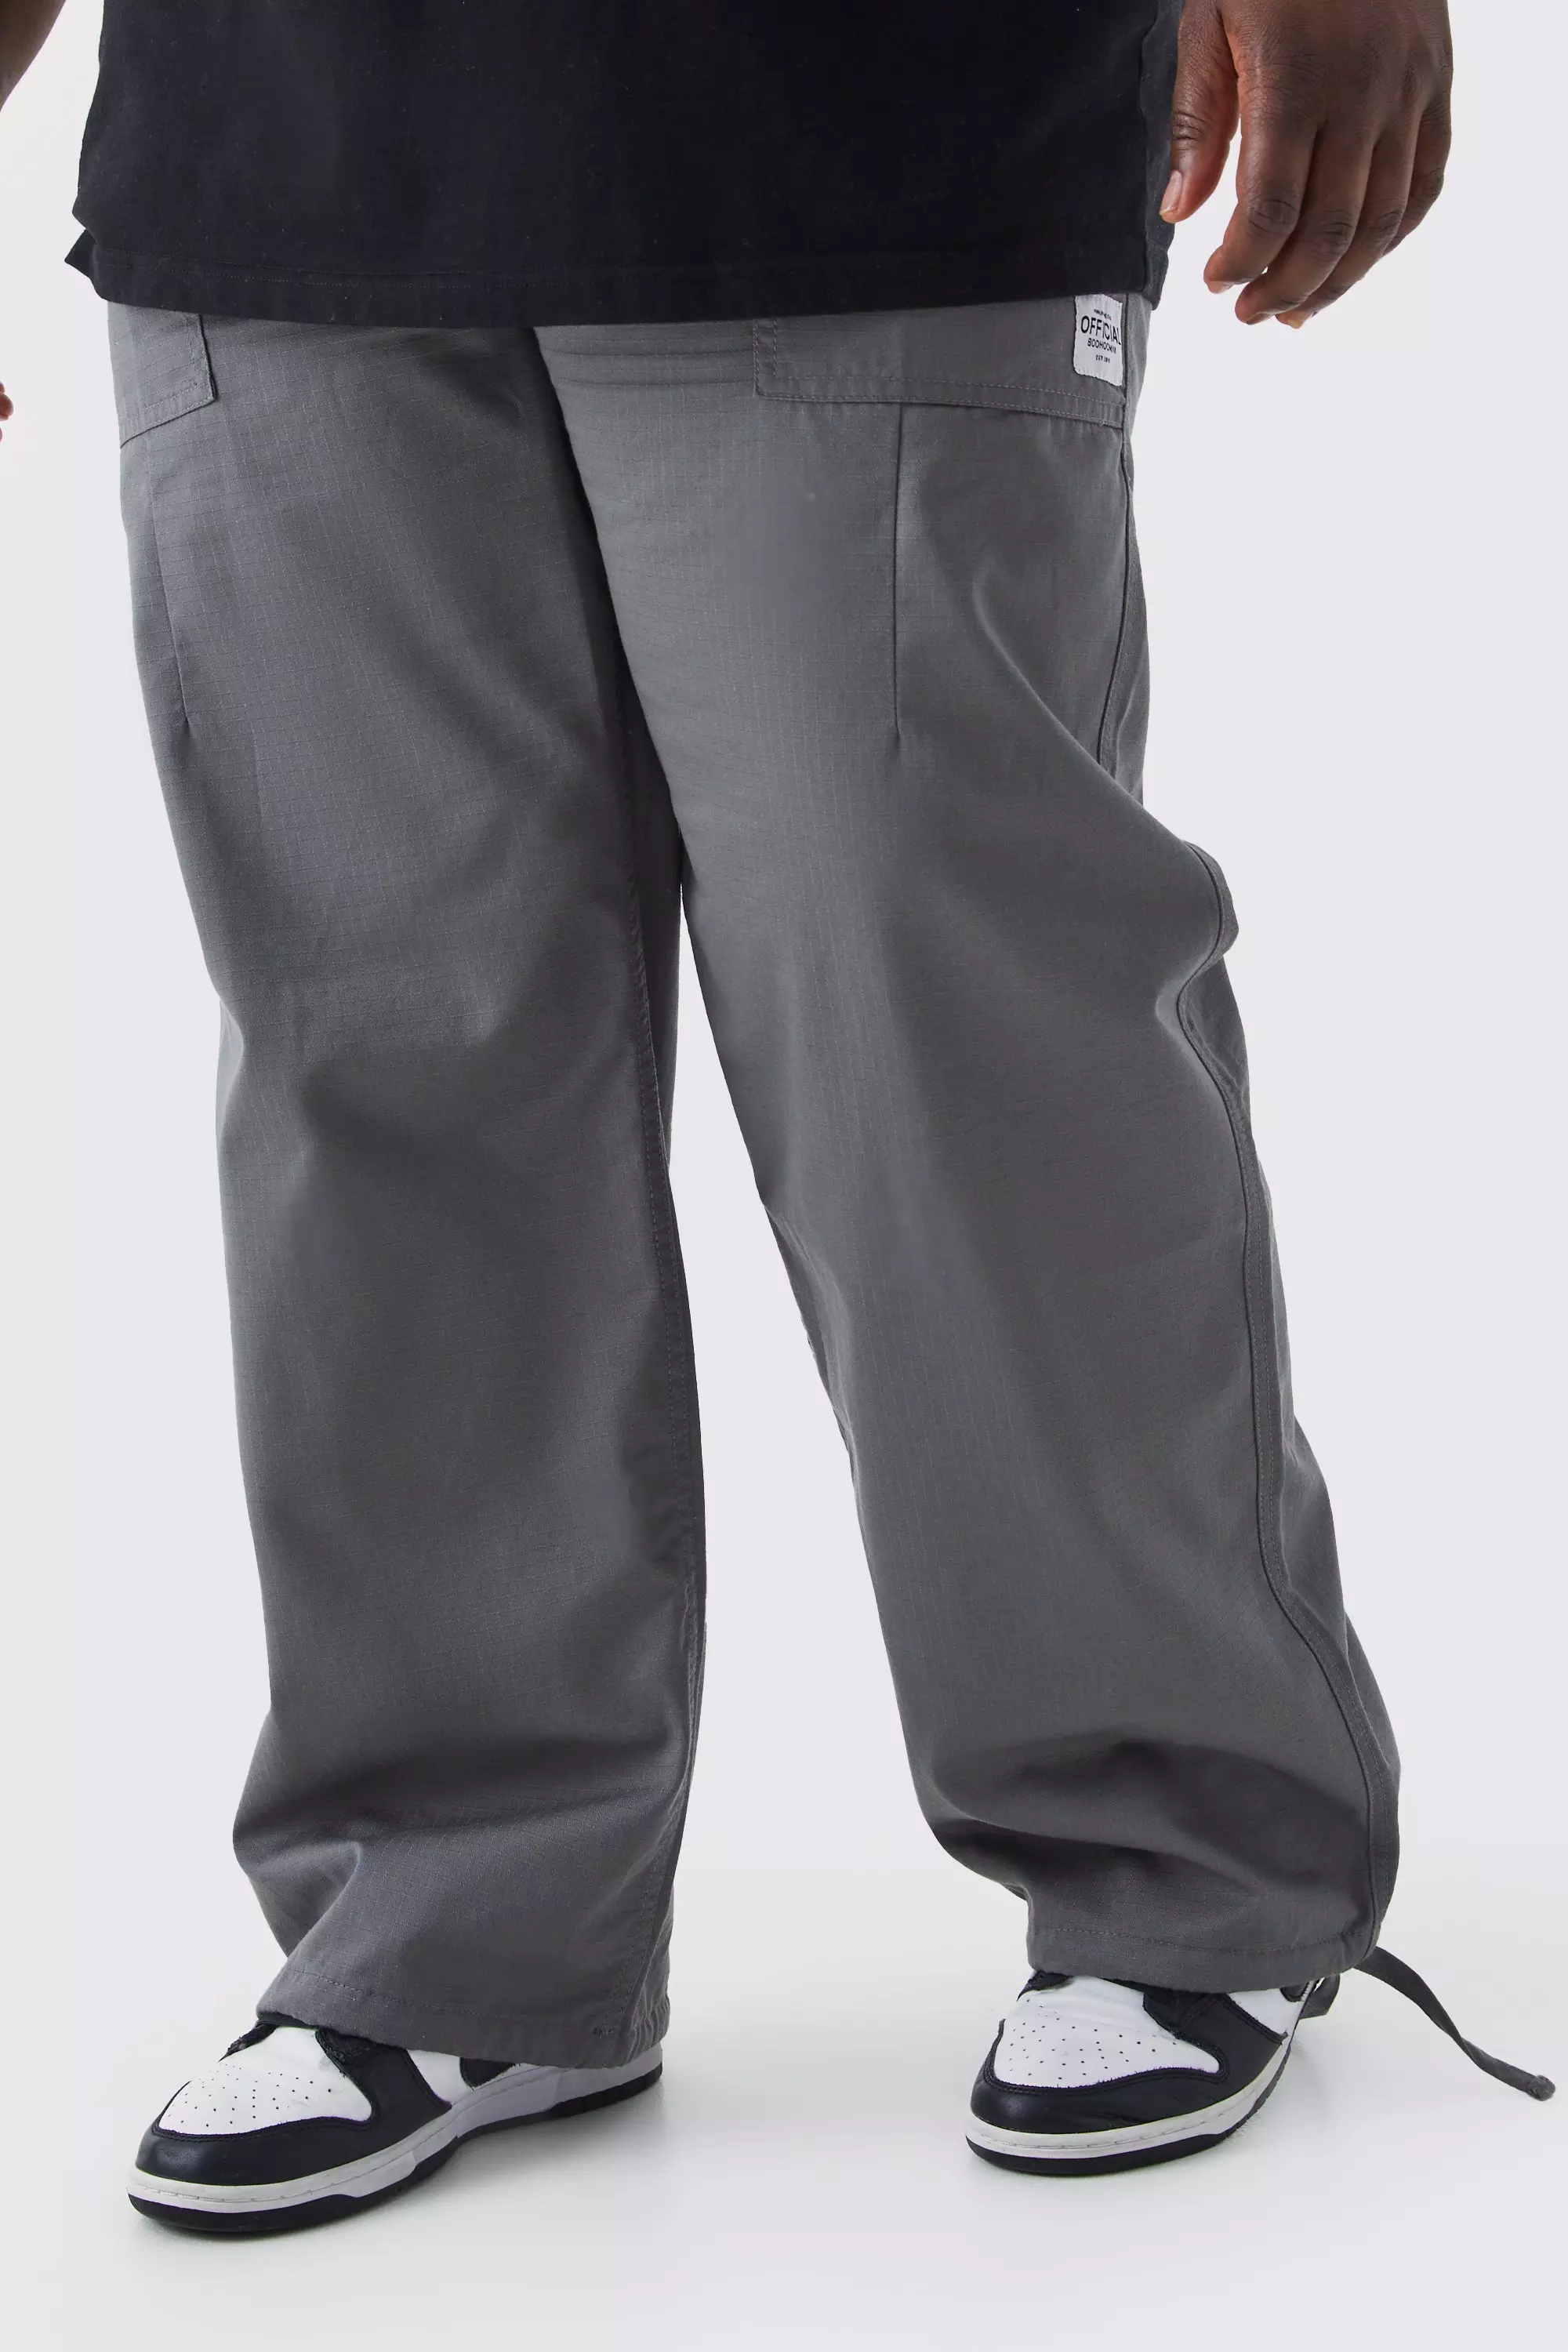 Plus Elastic Relaxed Long Ripstop Pants With Tab Charcoal